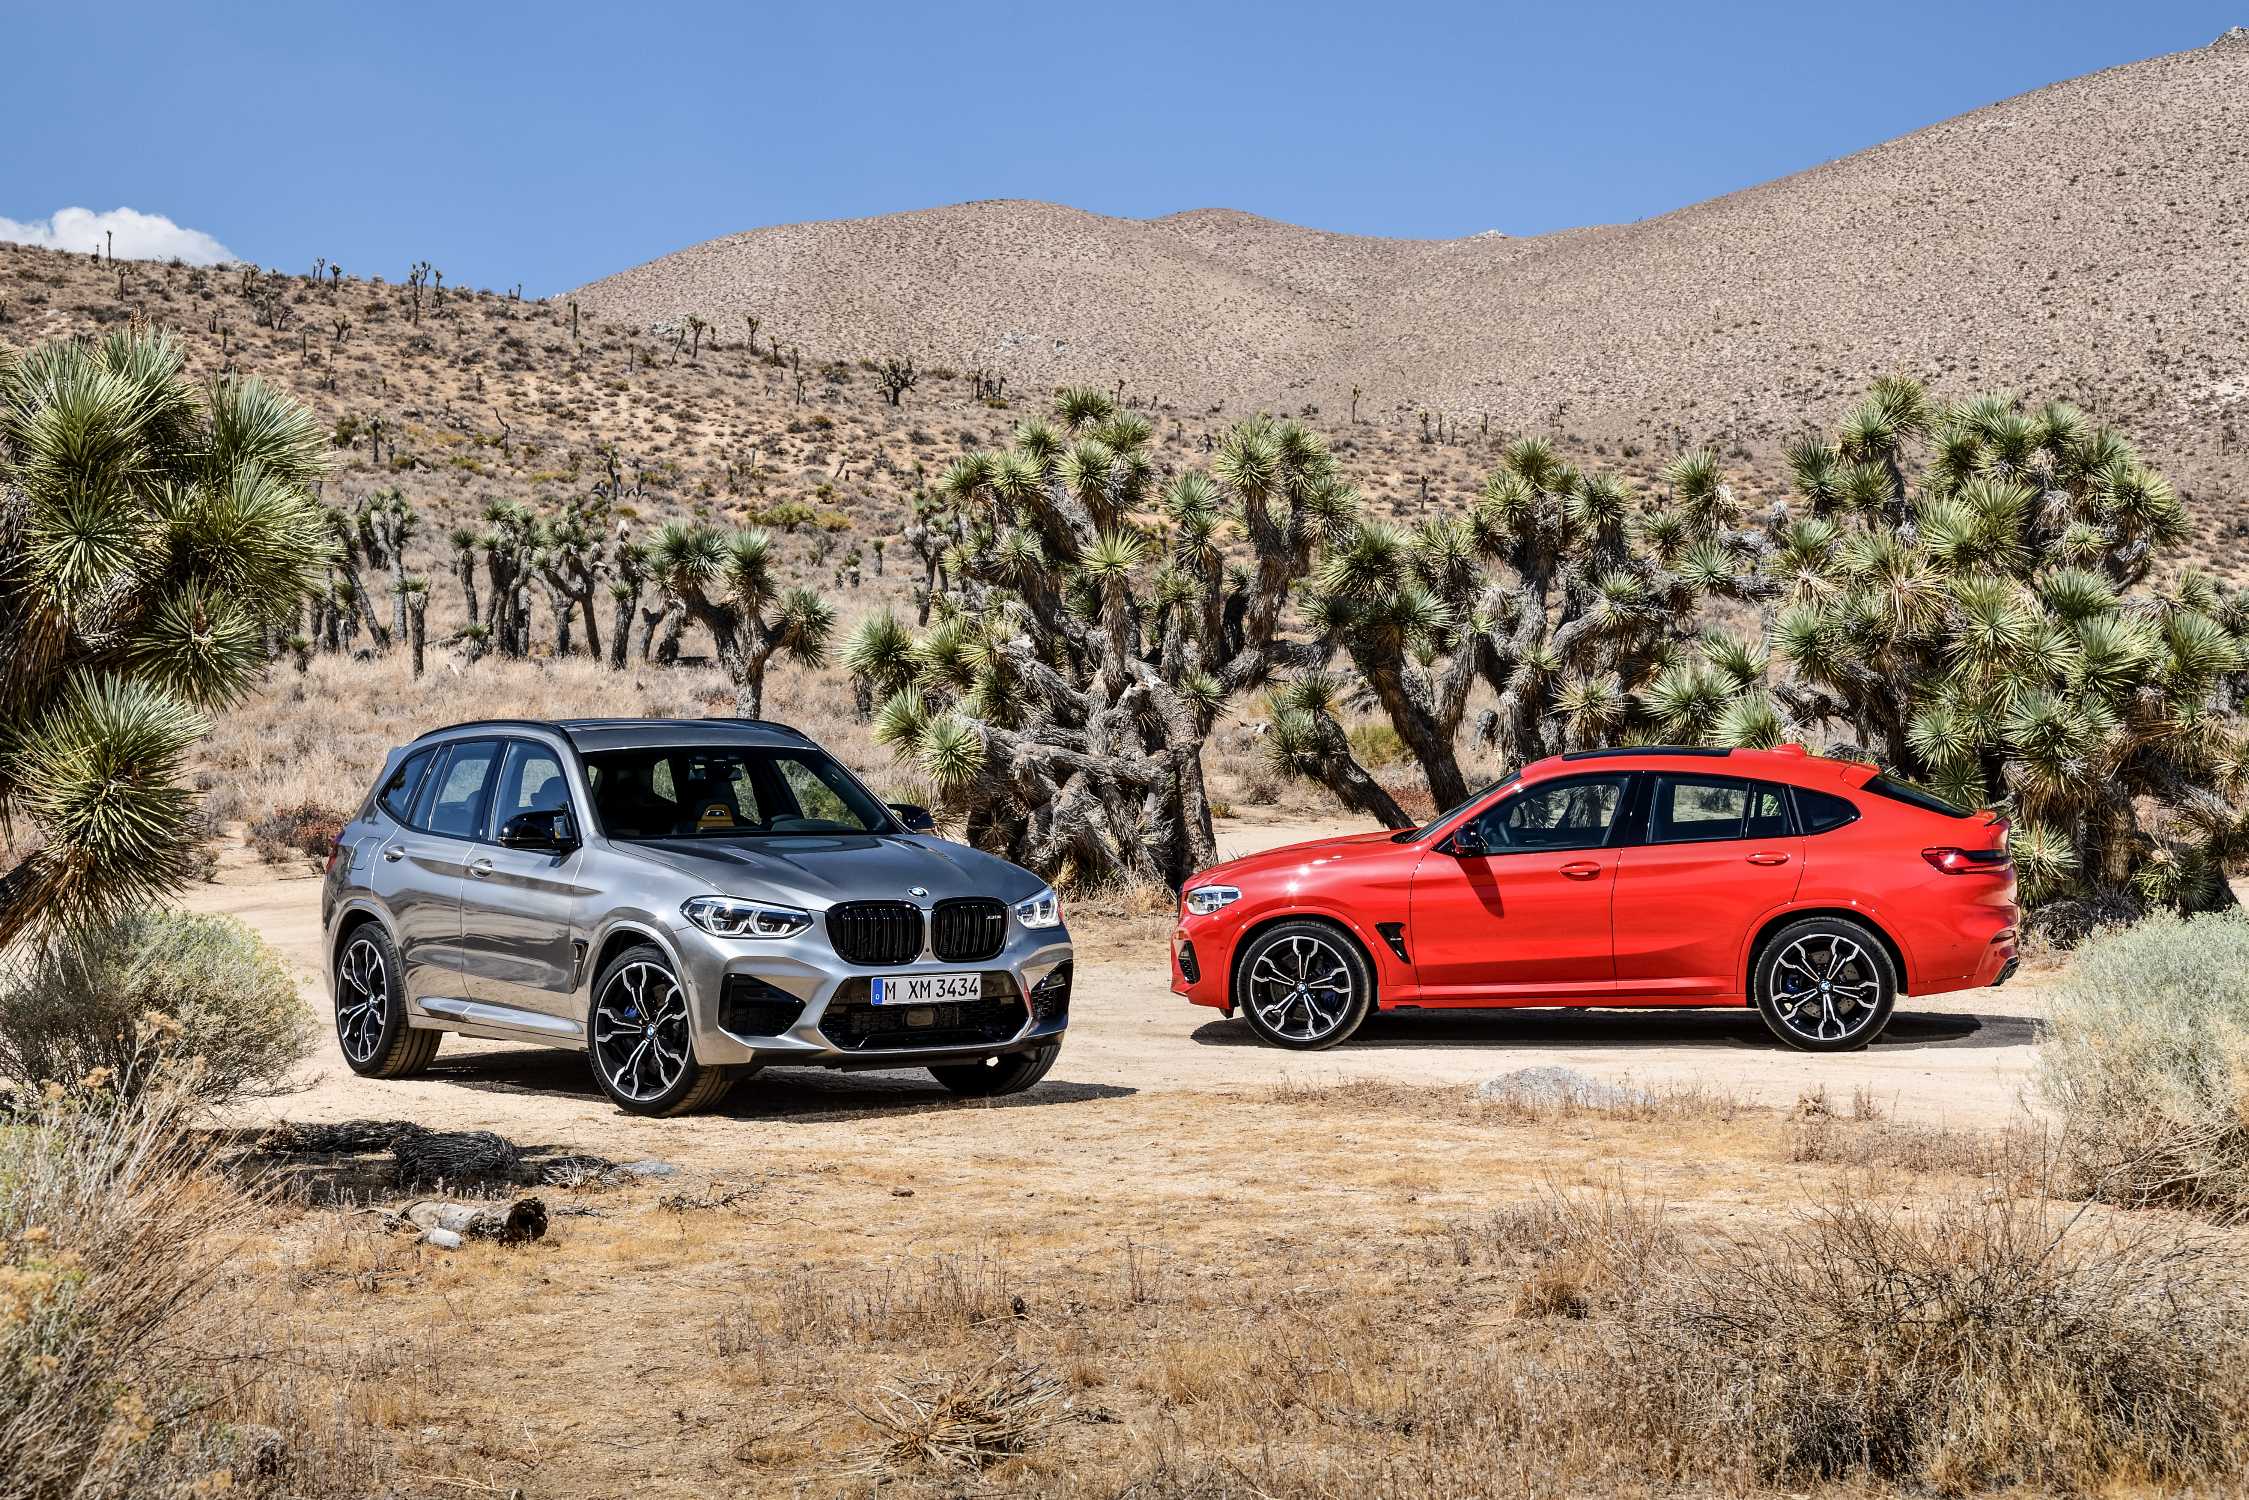 The new BMW X3 M and BMW X4 M Competition models